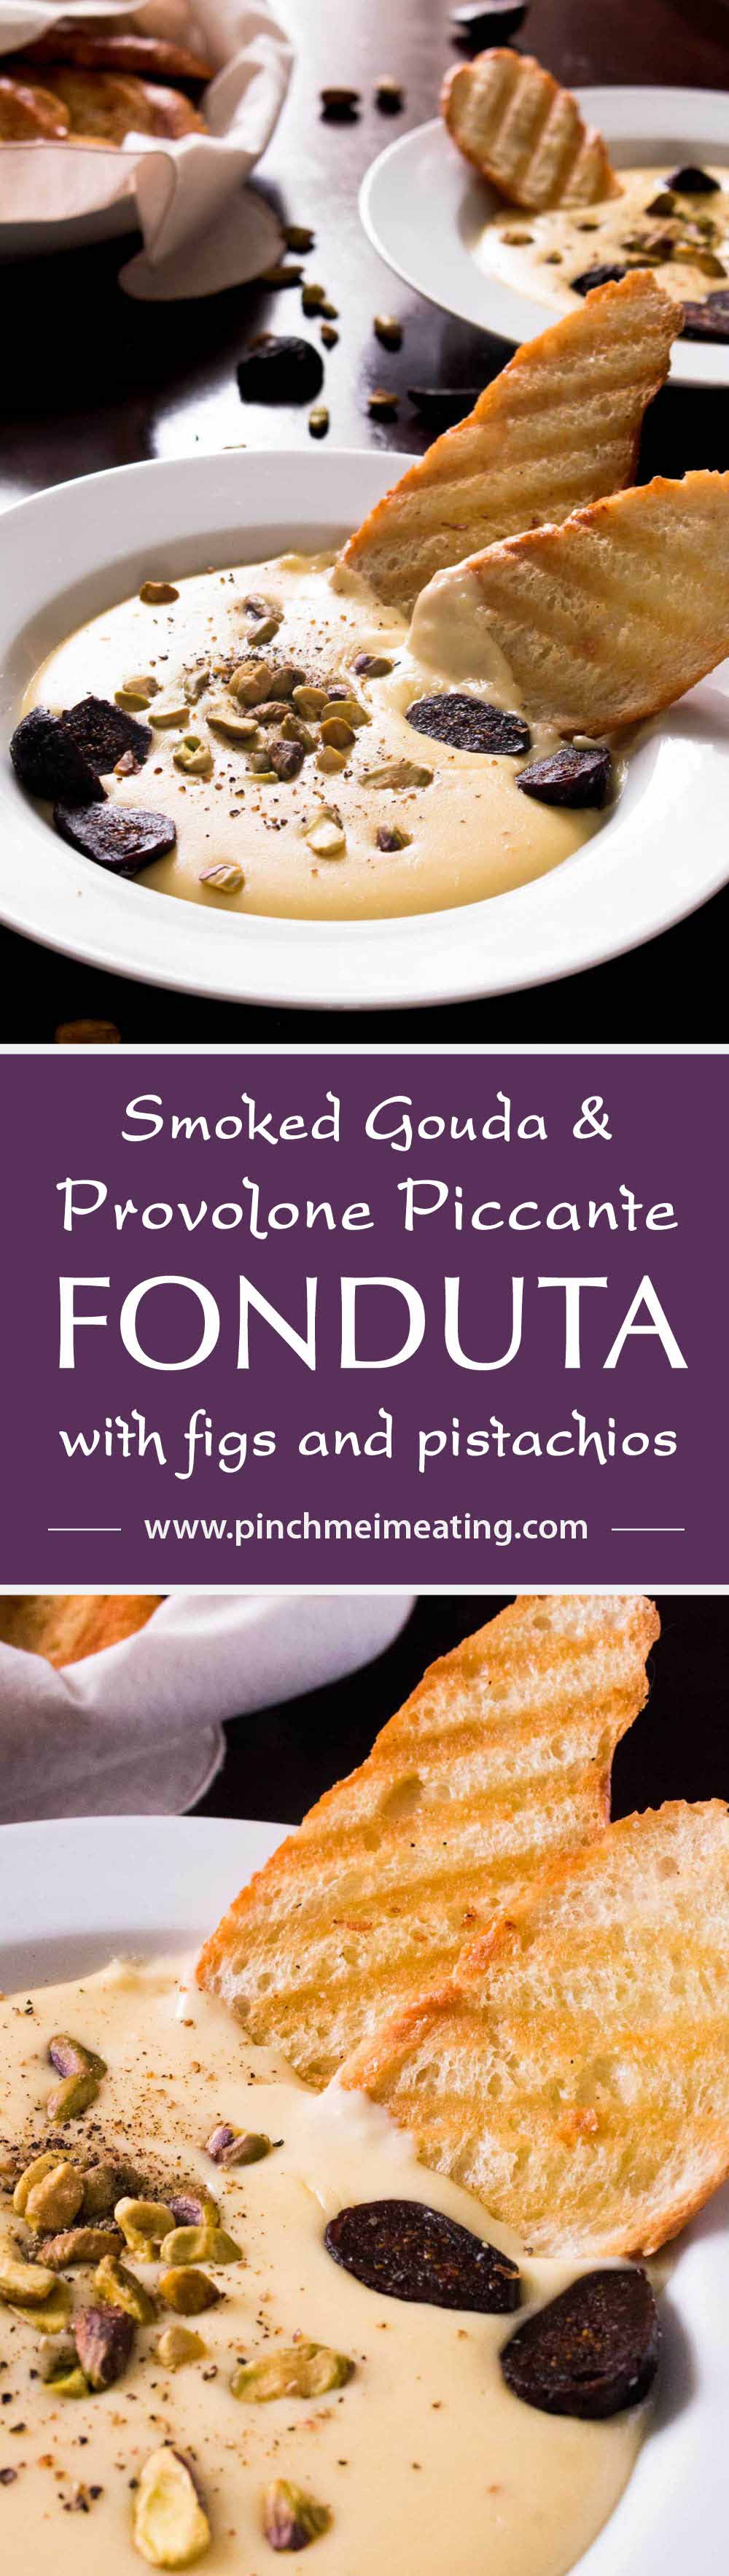 Smoked Gouda and Provolone Piccante Fonduta with Figs and Pistachios - a hot, smokey Italian cheese dip perfect for dipping bread and dried fruit. The Italian version of French fondue, made with milk and egg yolks instead of wine and cornstarch. It's the perfect romantic appetizer, and is both beautiful and simple to whip up! | www.pinchmeimeating.com